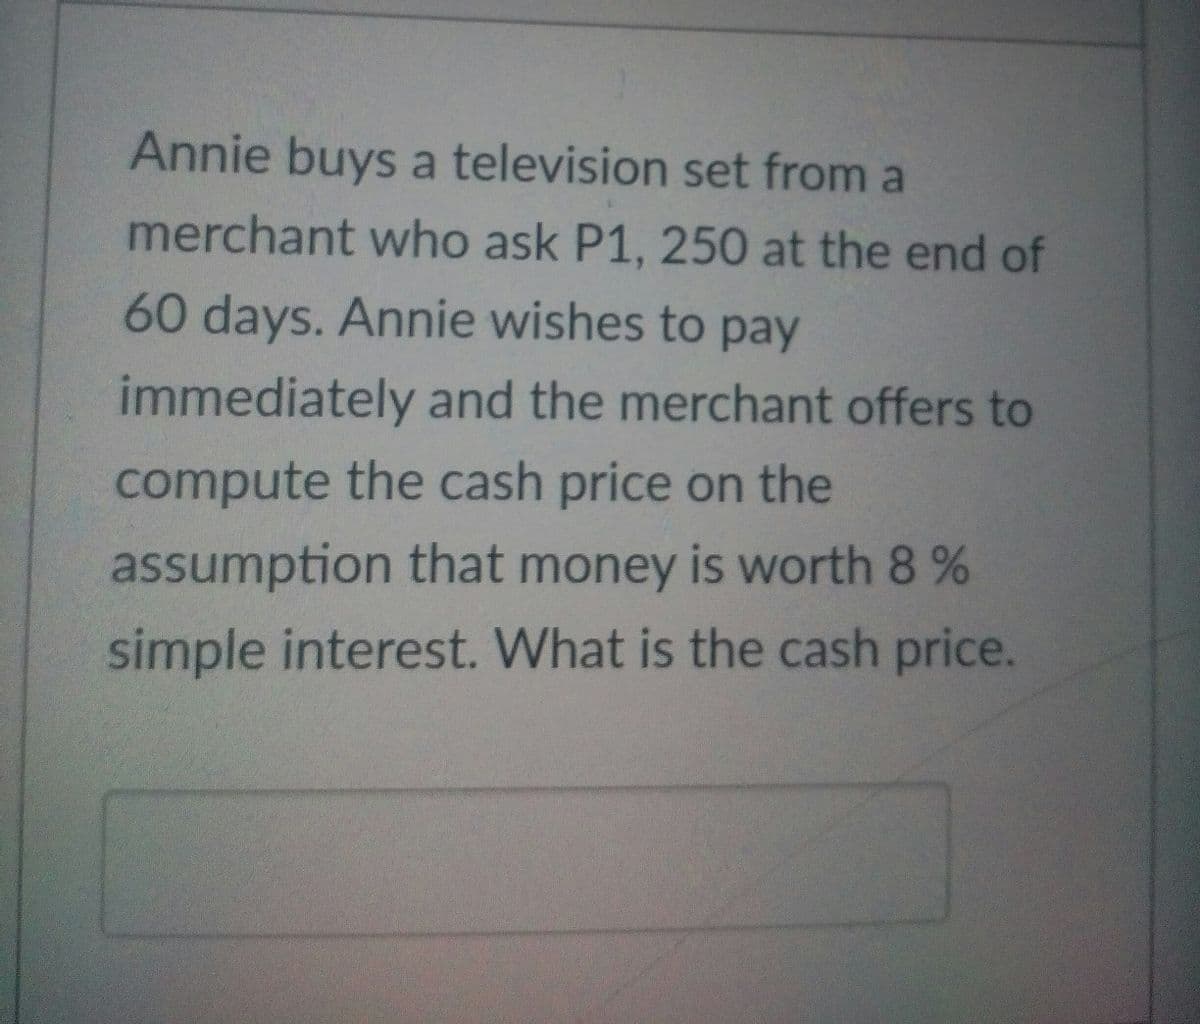 Annie buys a television set from a
merchant who ask P1, 250 at the end of
60 days. Annie wishes to pay
immediately and the merchant offers to
compute the cash price on the
assumption that money is worth 8 %
simple interest. What is the cash price.
